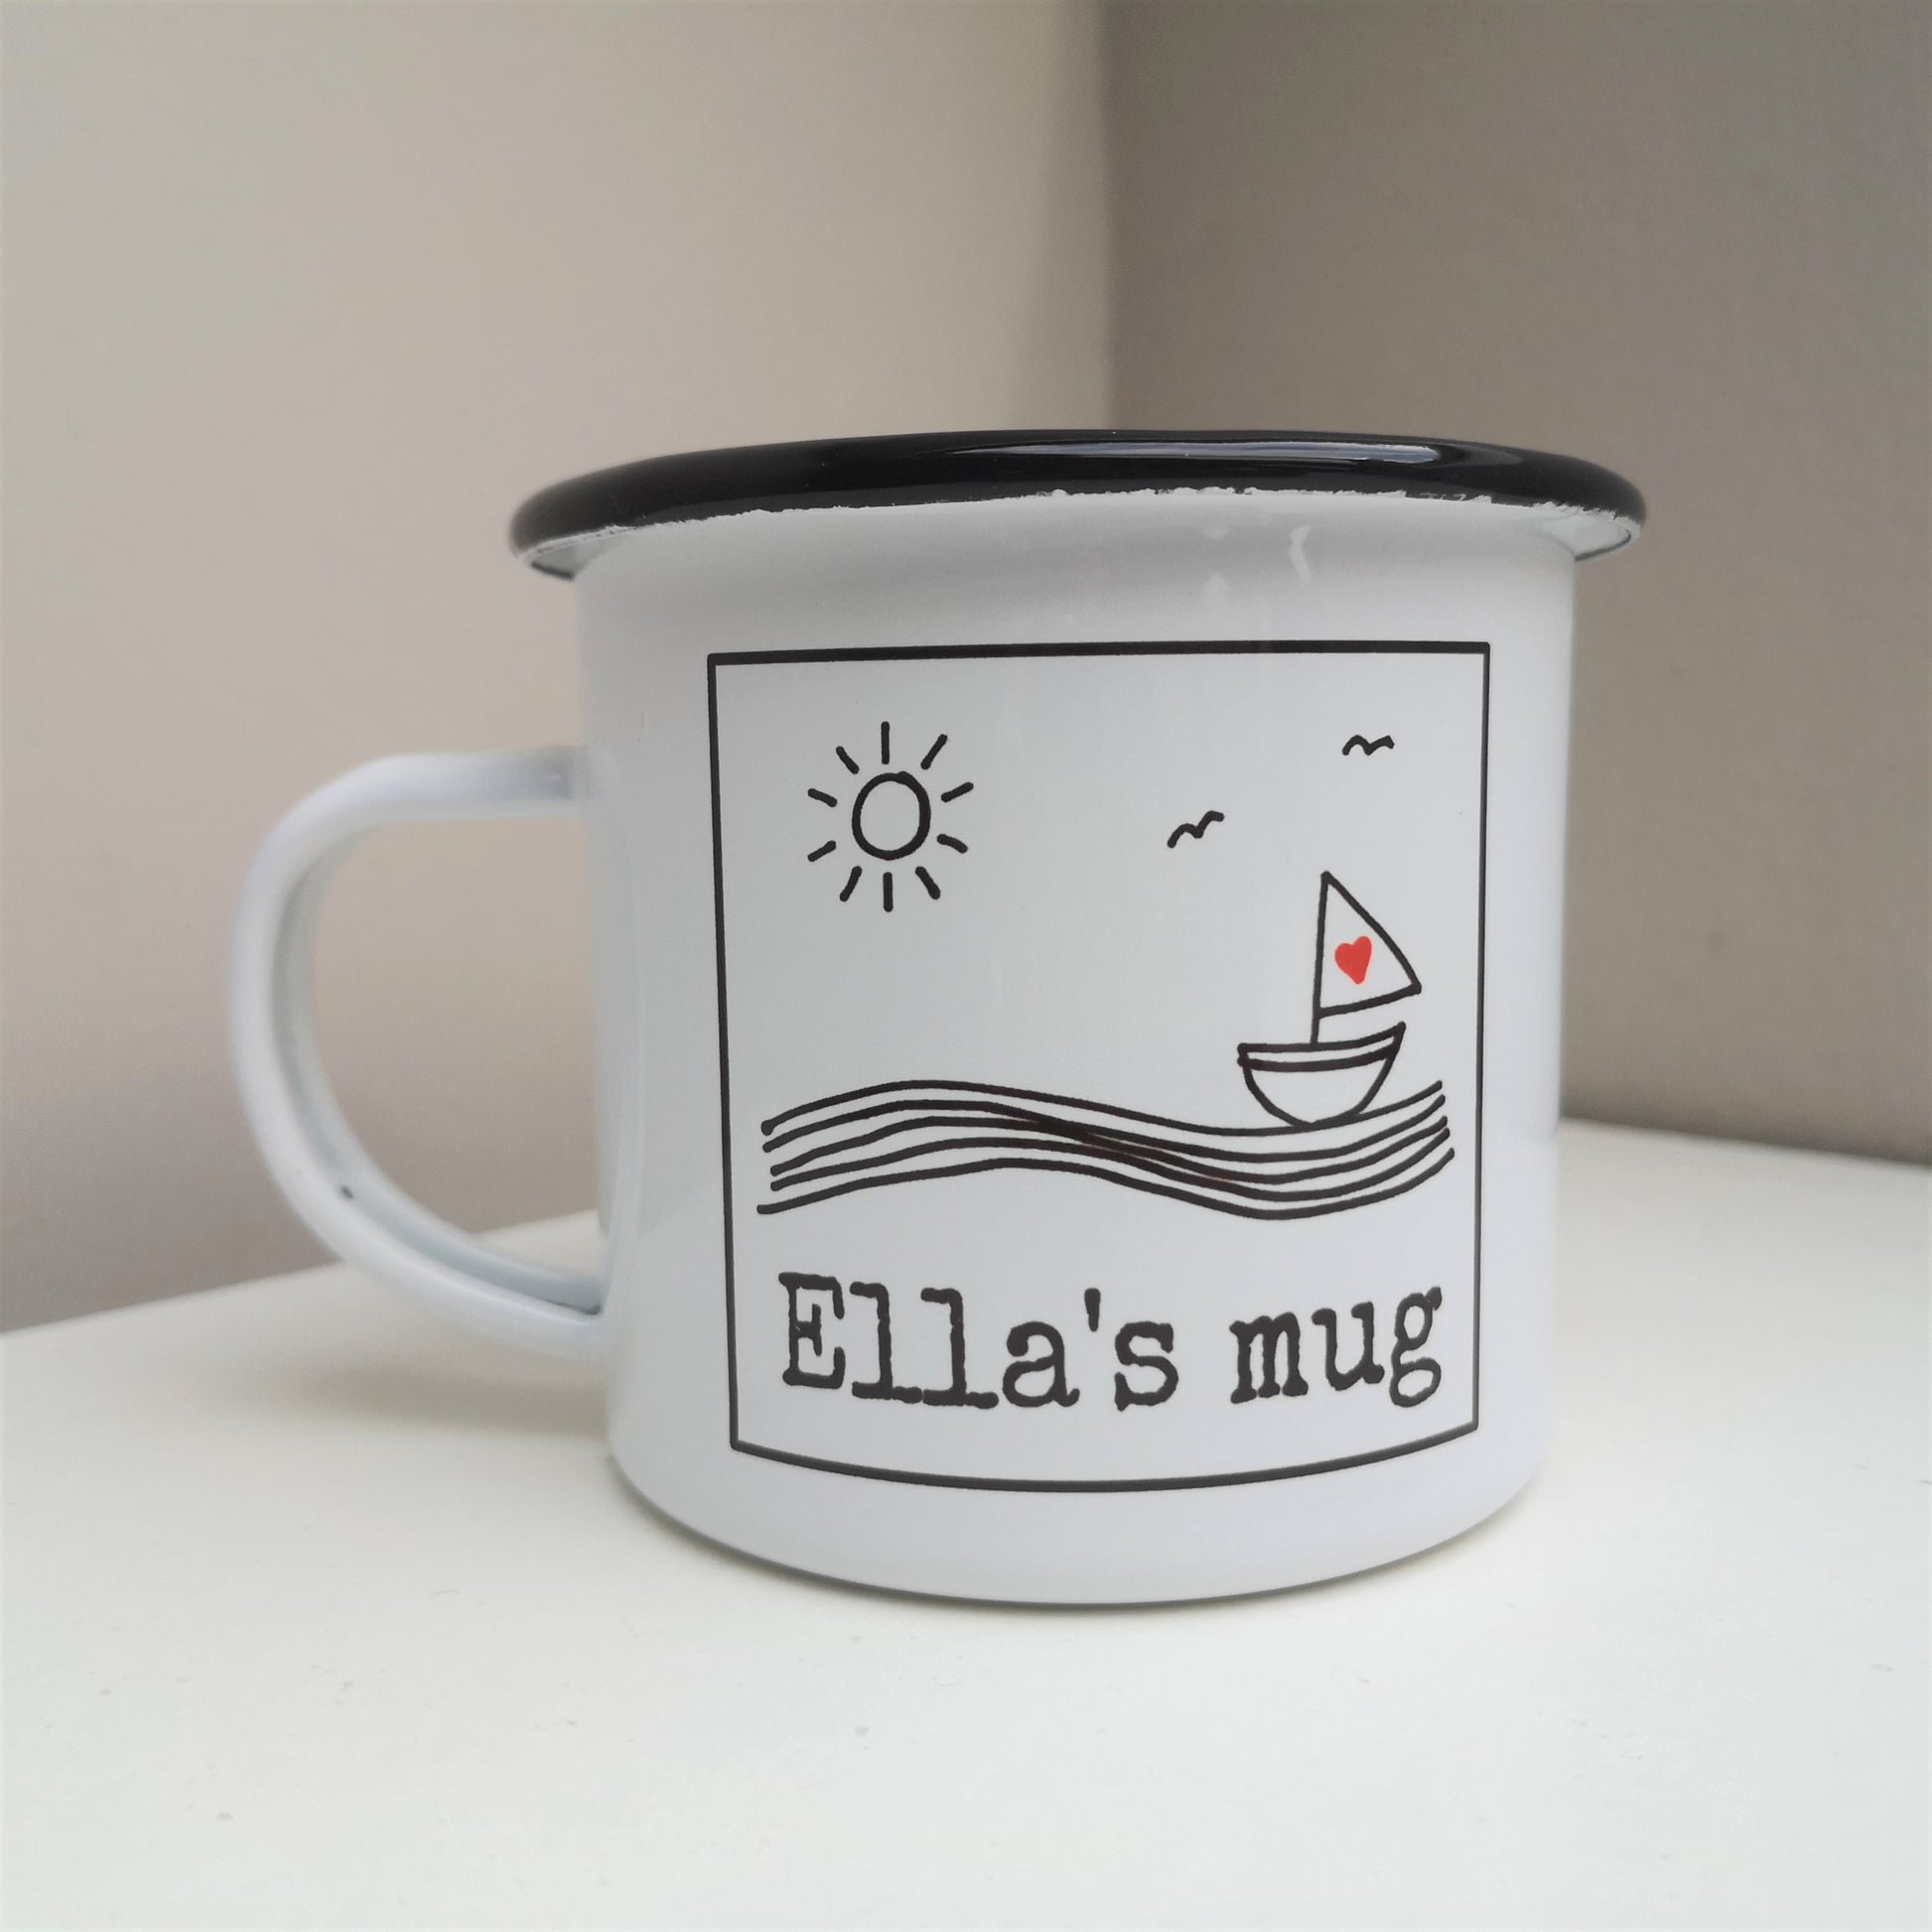 A white enamel mug with a black & white framed hand drawn seaside scene, with space along the bottom for the owner's name.